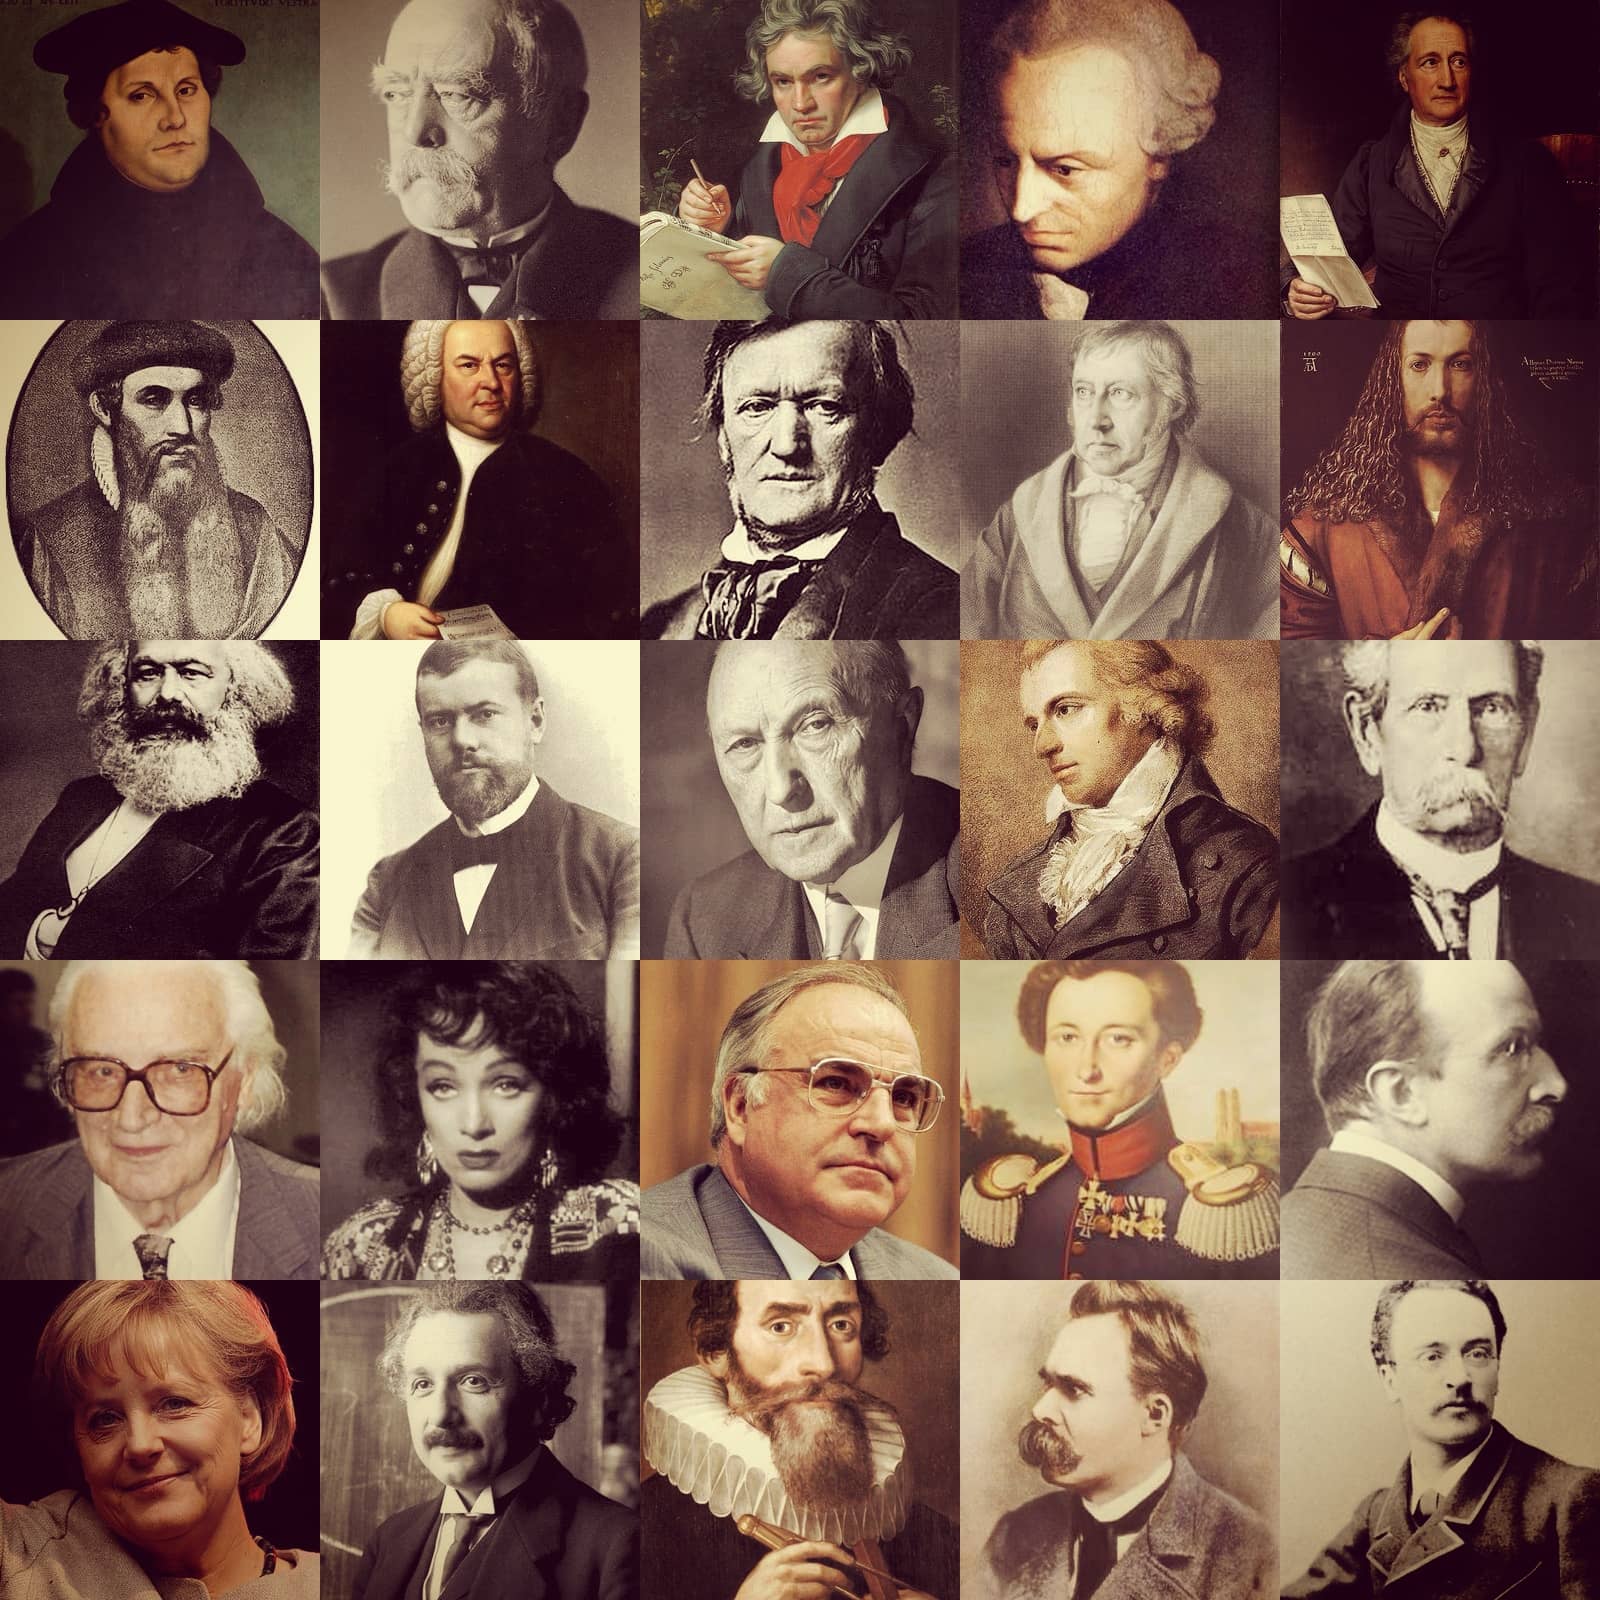 Collage of classical poets like William Shakespeare, Percy Bysshe Shelly etc.